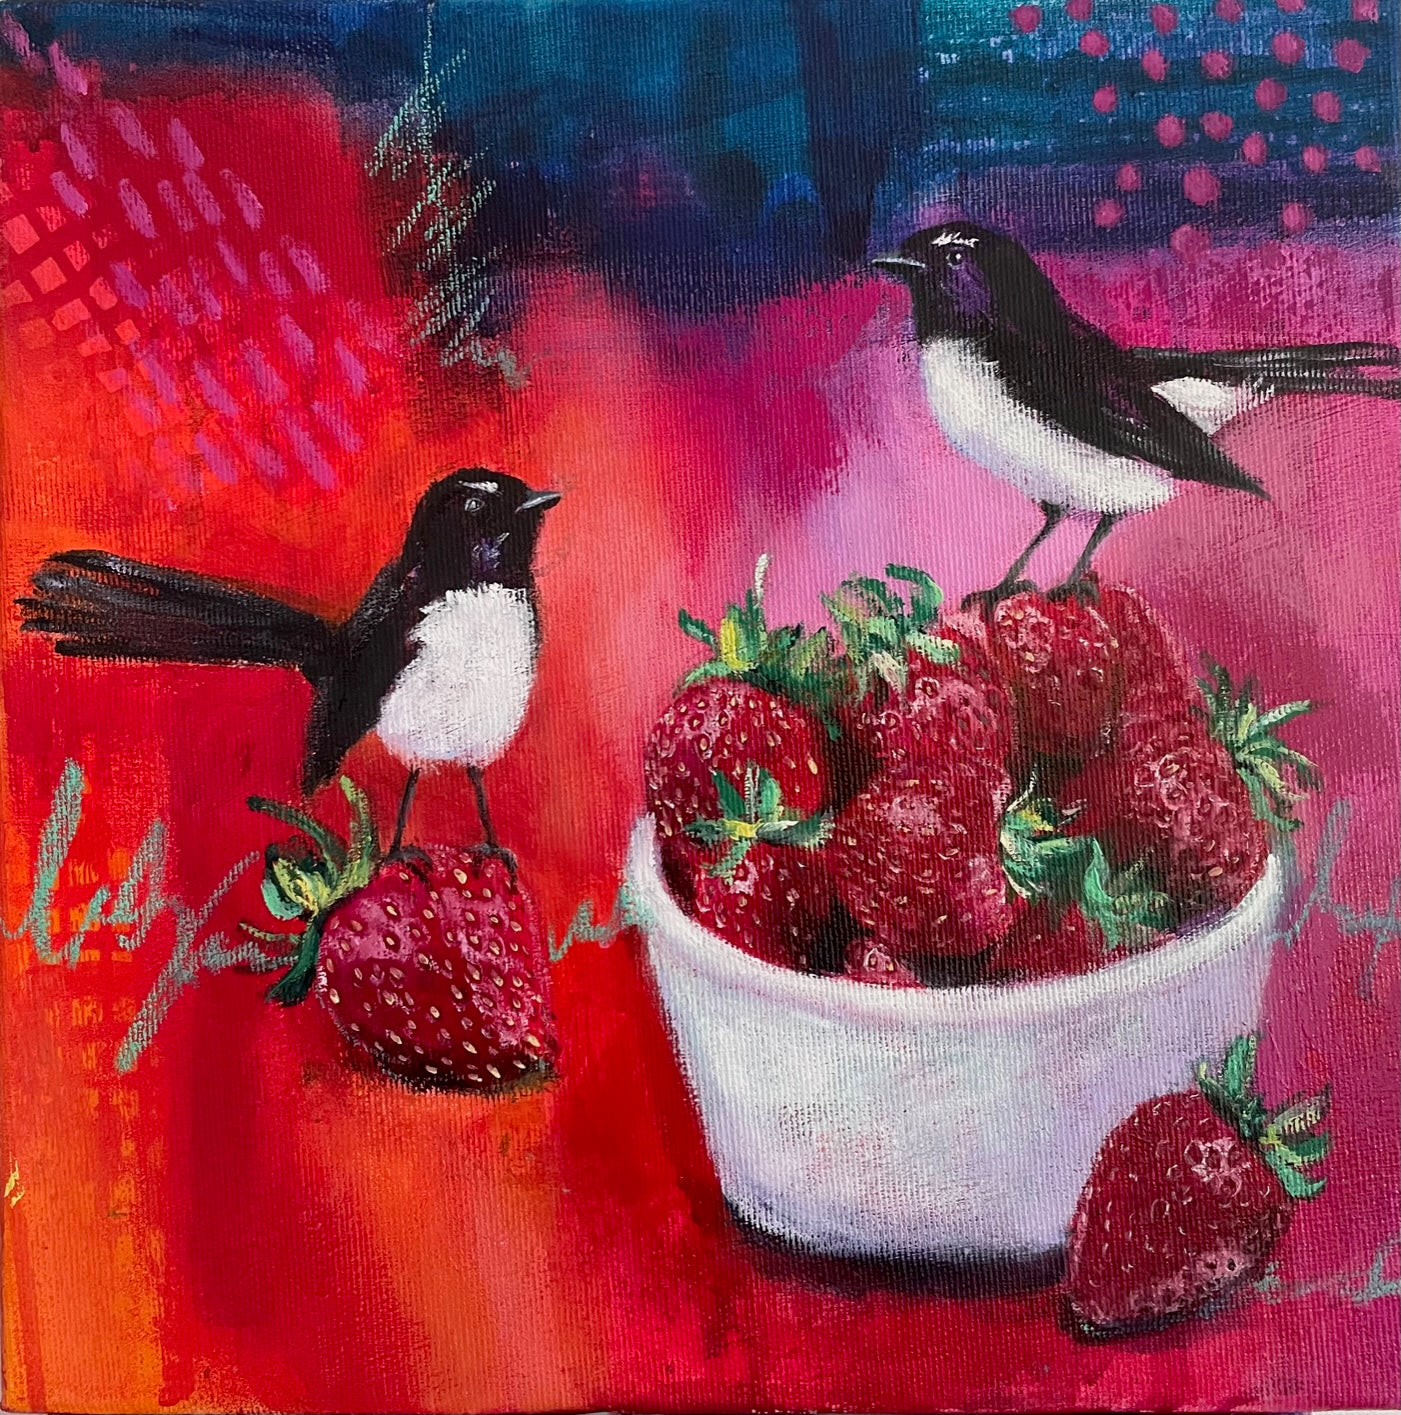 Colourful Abstract Realism painting of willie Wagtails and a bowl of strawberries on abstract background.